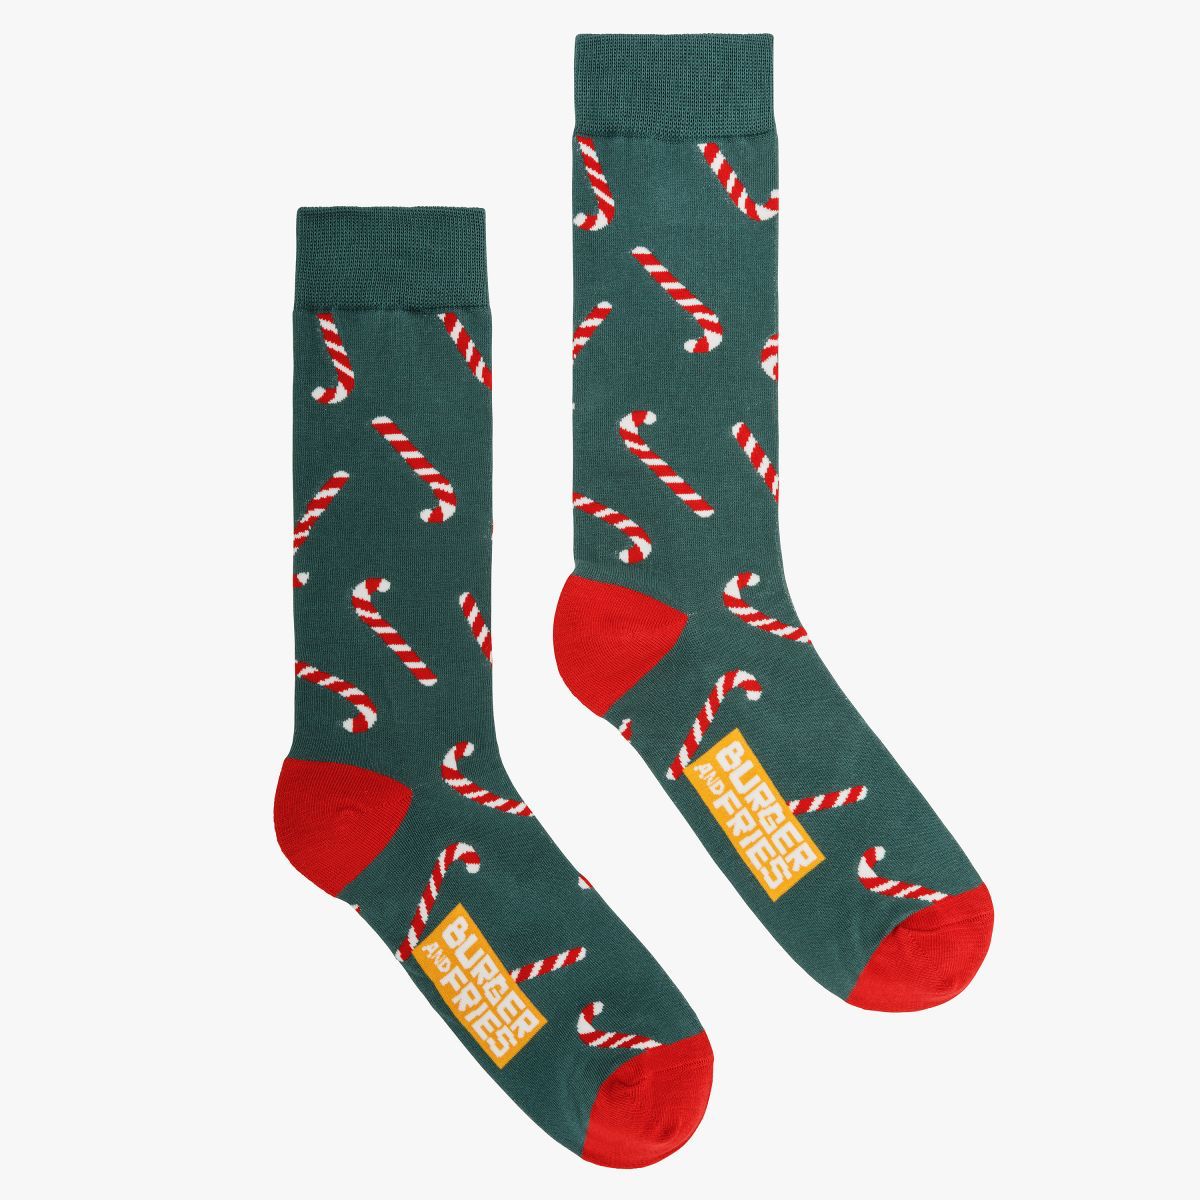 SOCKS BURGER AND FRIES - CHRISTMAS SOCKS CANDY CANES LOVER